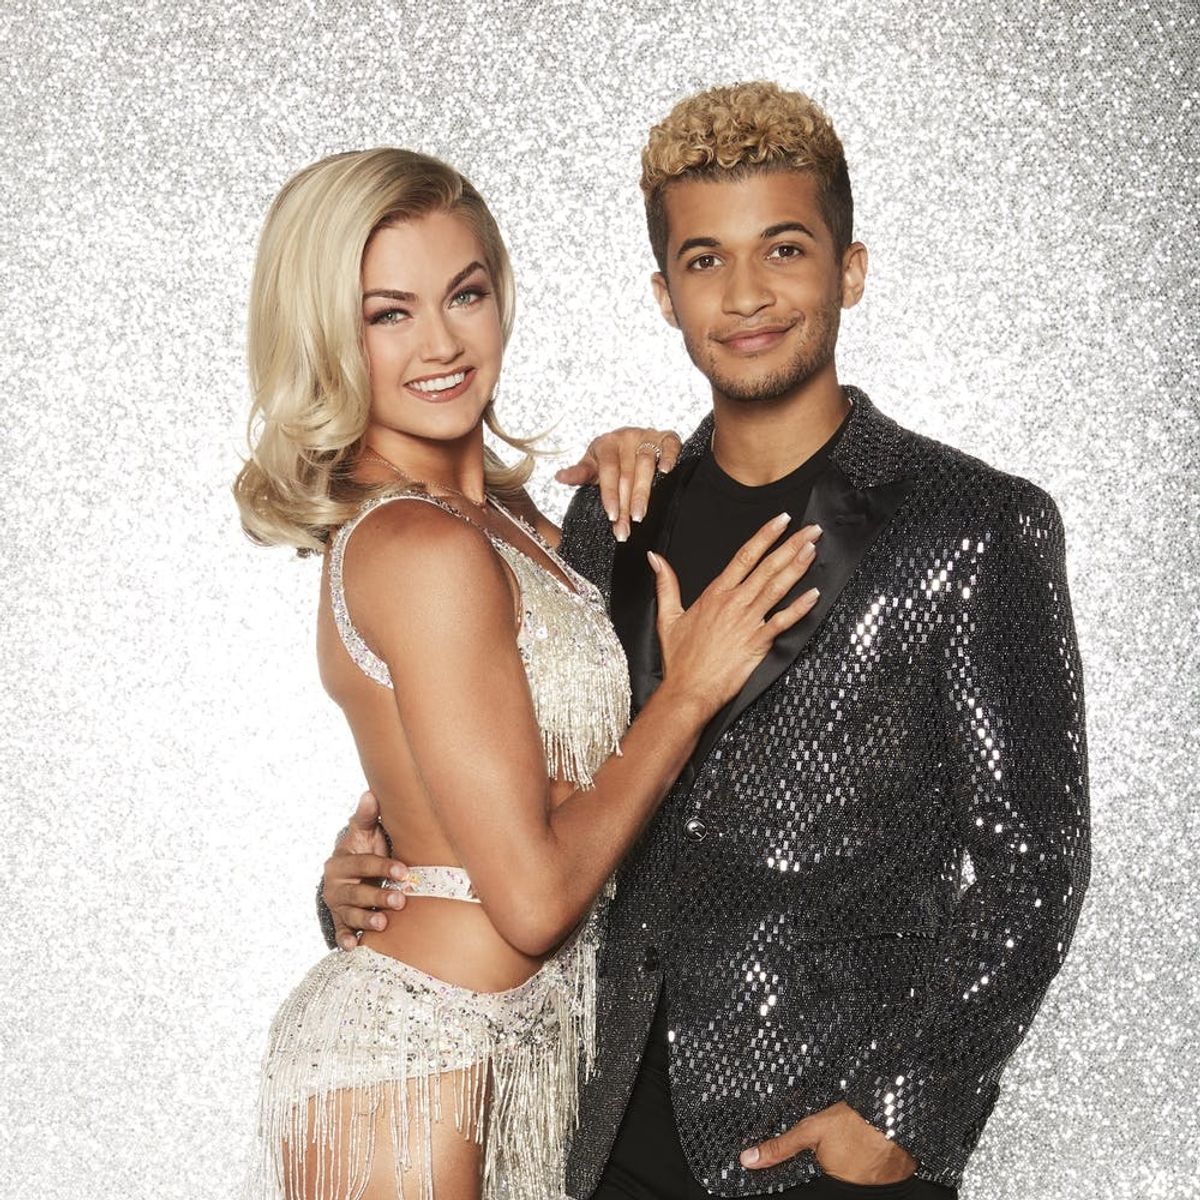 “Dancing With the Stars” Season 25 Finale, Part 1: Who Made the Top 3?